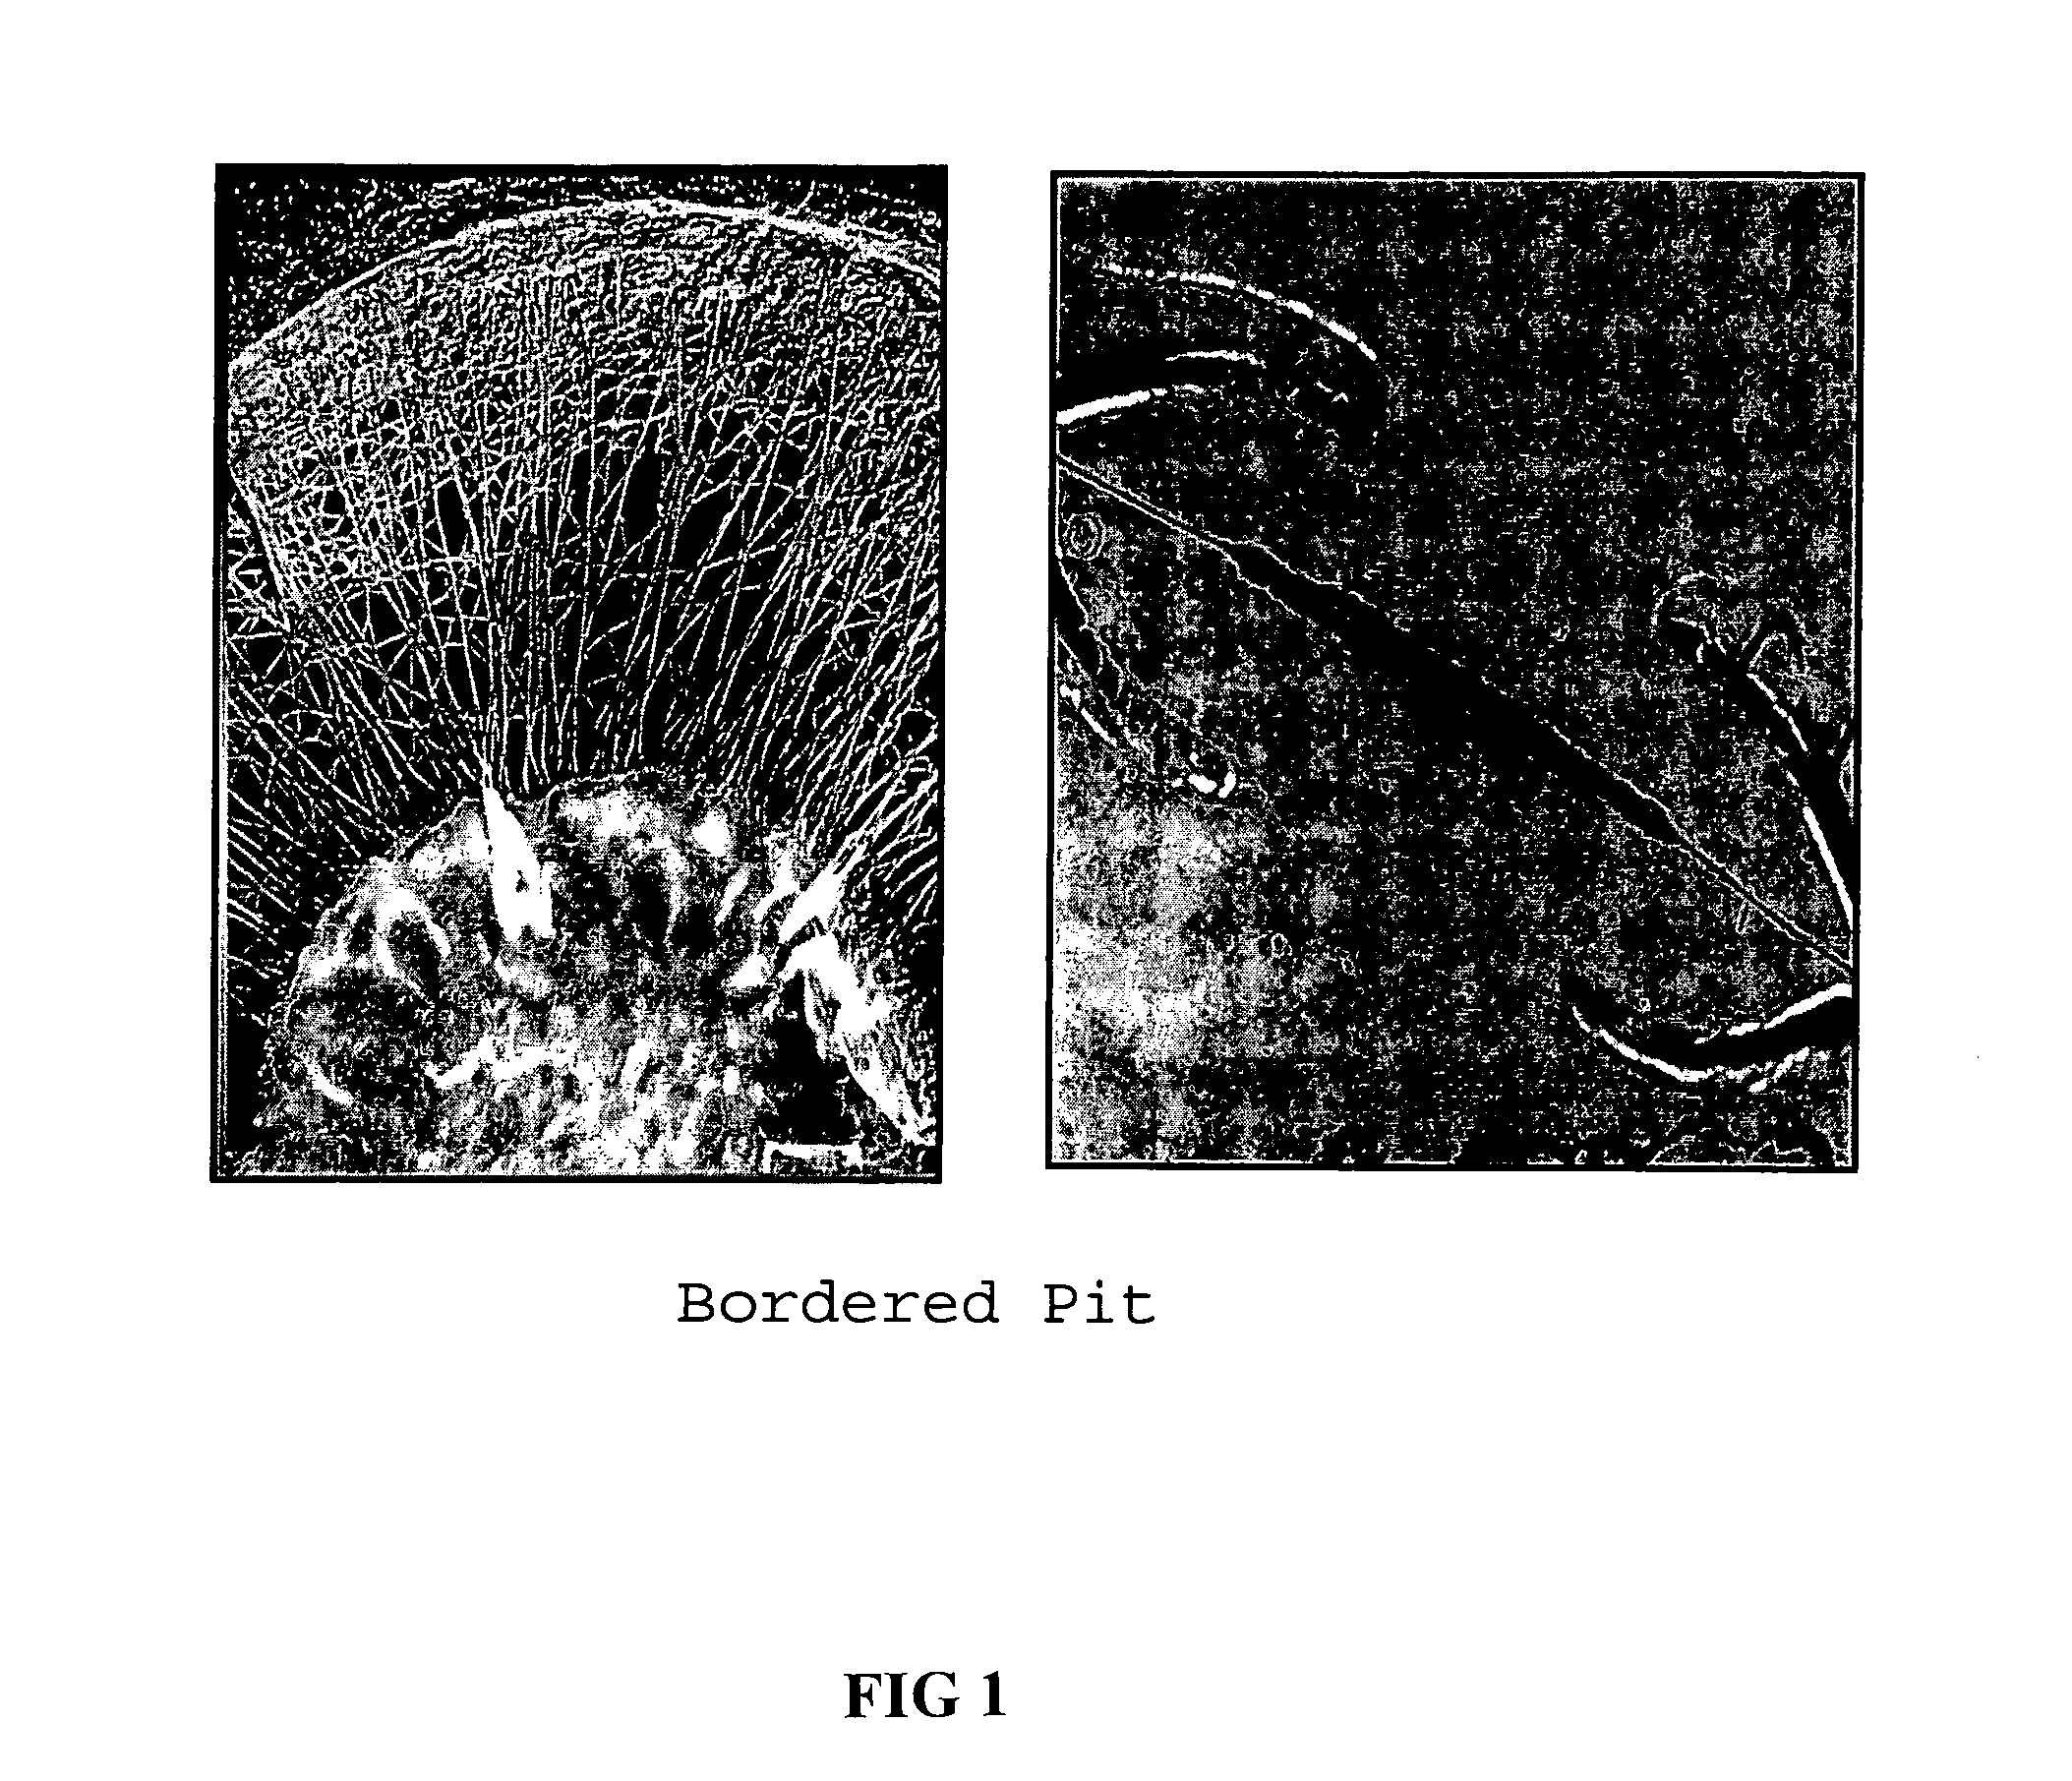 Wood preservative compositions comprising isothiazolone-pyrethroids